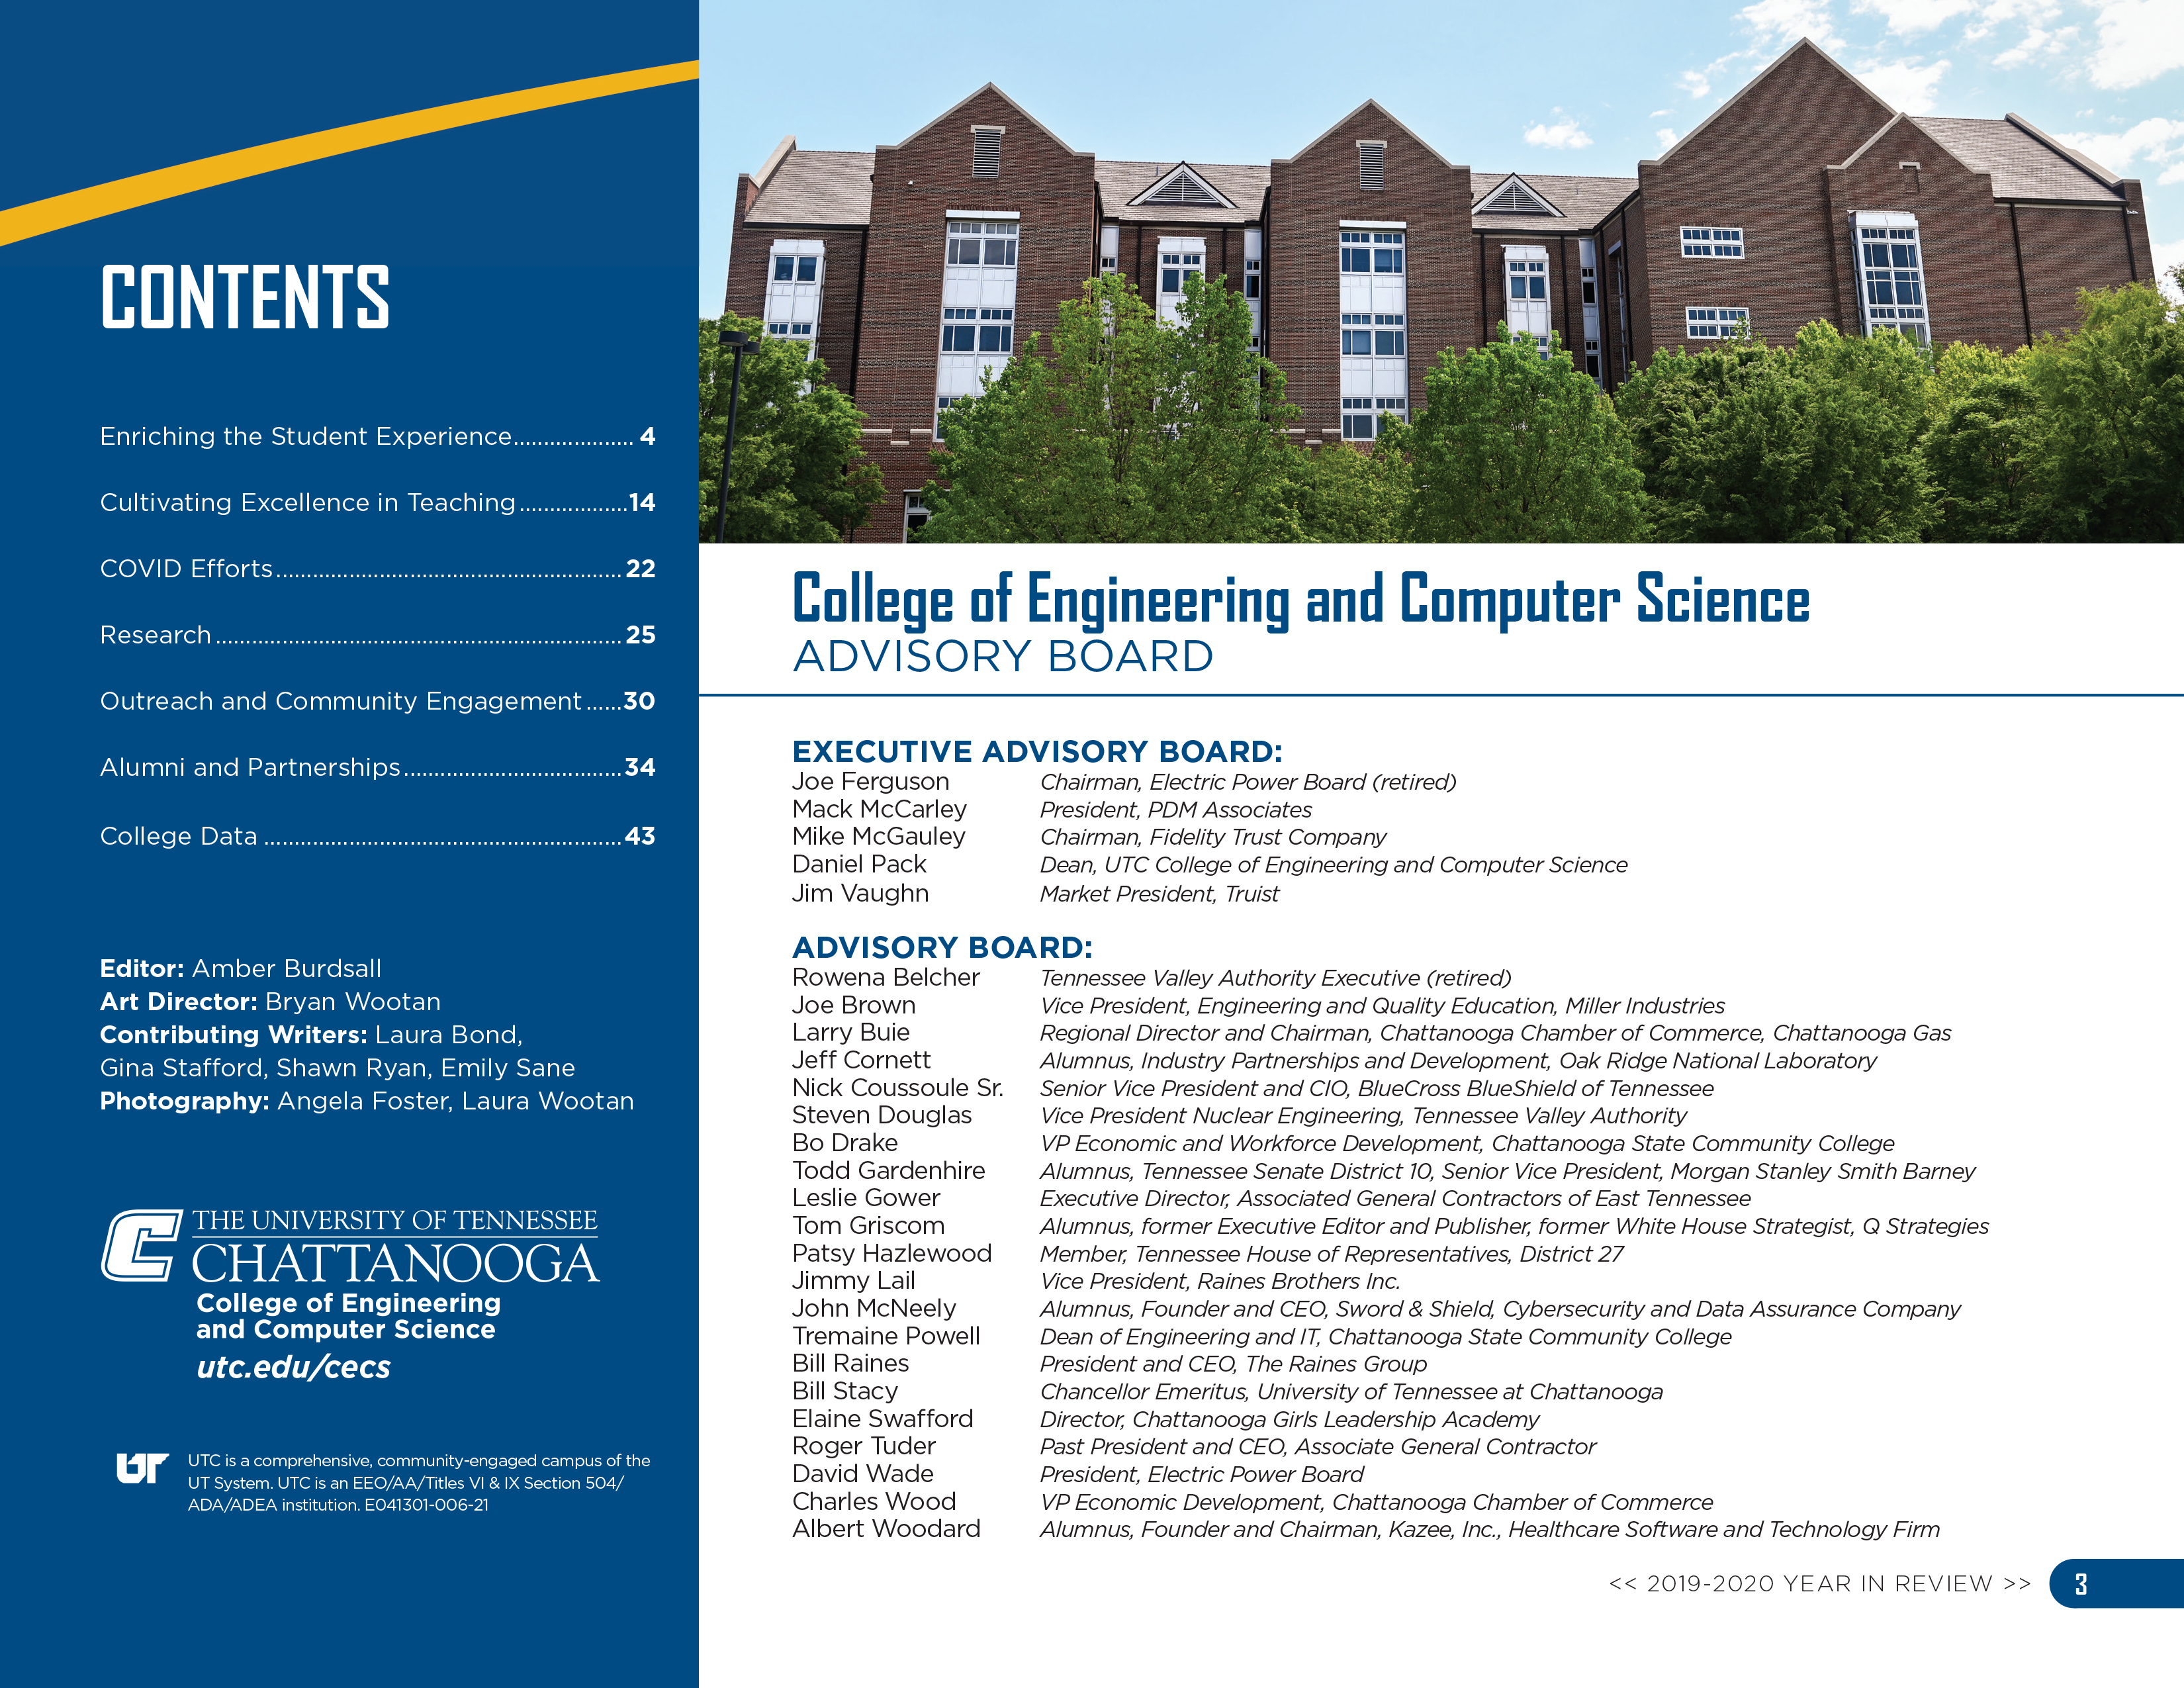 College of Engineering and Computer Science Annual Review; text equivalent available at https://new.utc.edu/engineering-and-computer-science/about/annual-reviews